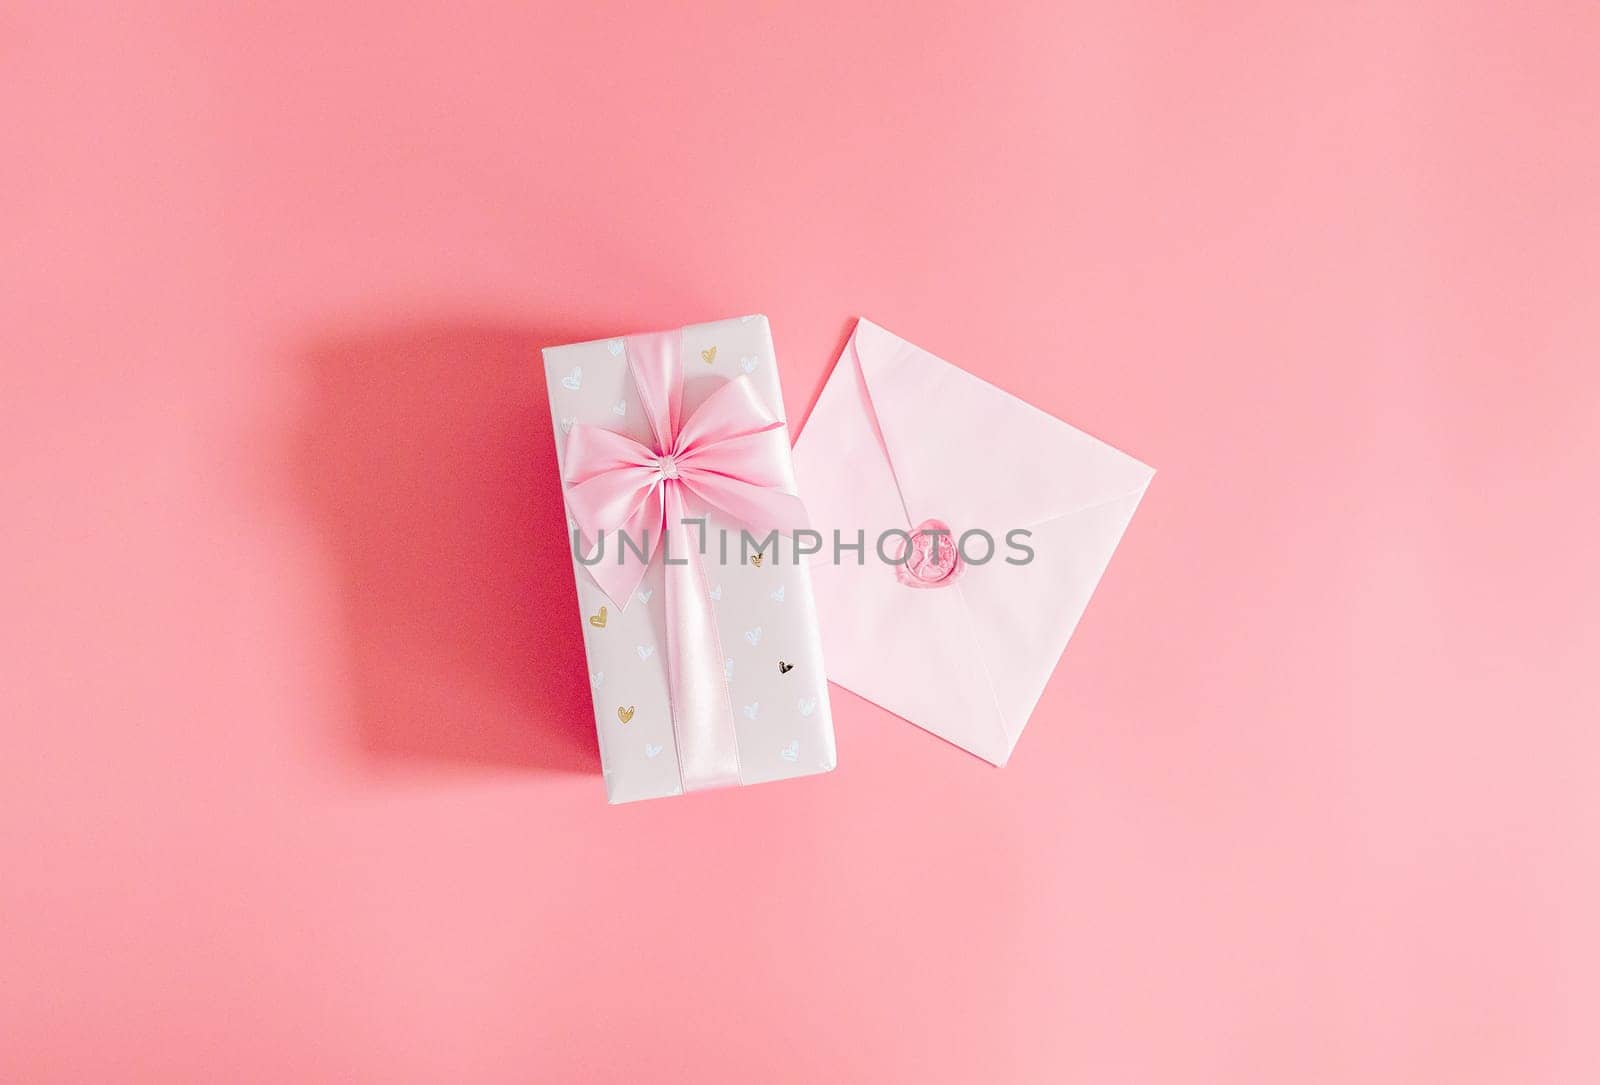 One beautiful gift box with a bow and a sealed envelope lie in the center on a pink background with copy space on the sides, flat lay close-up.